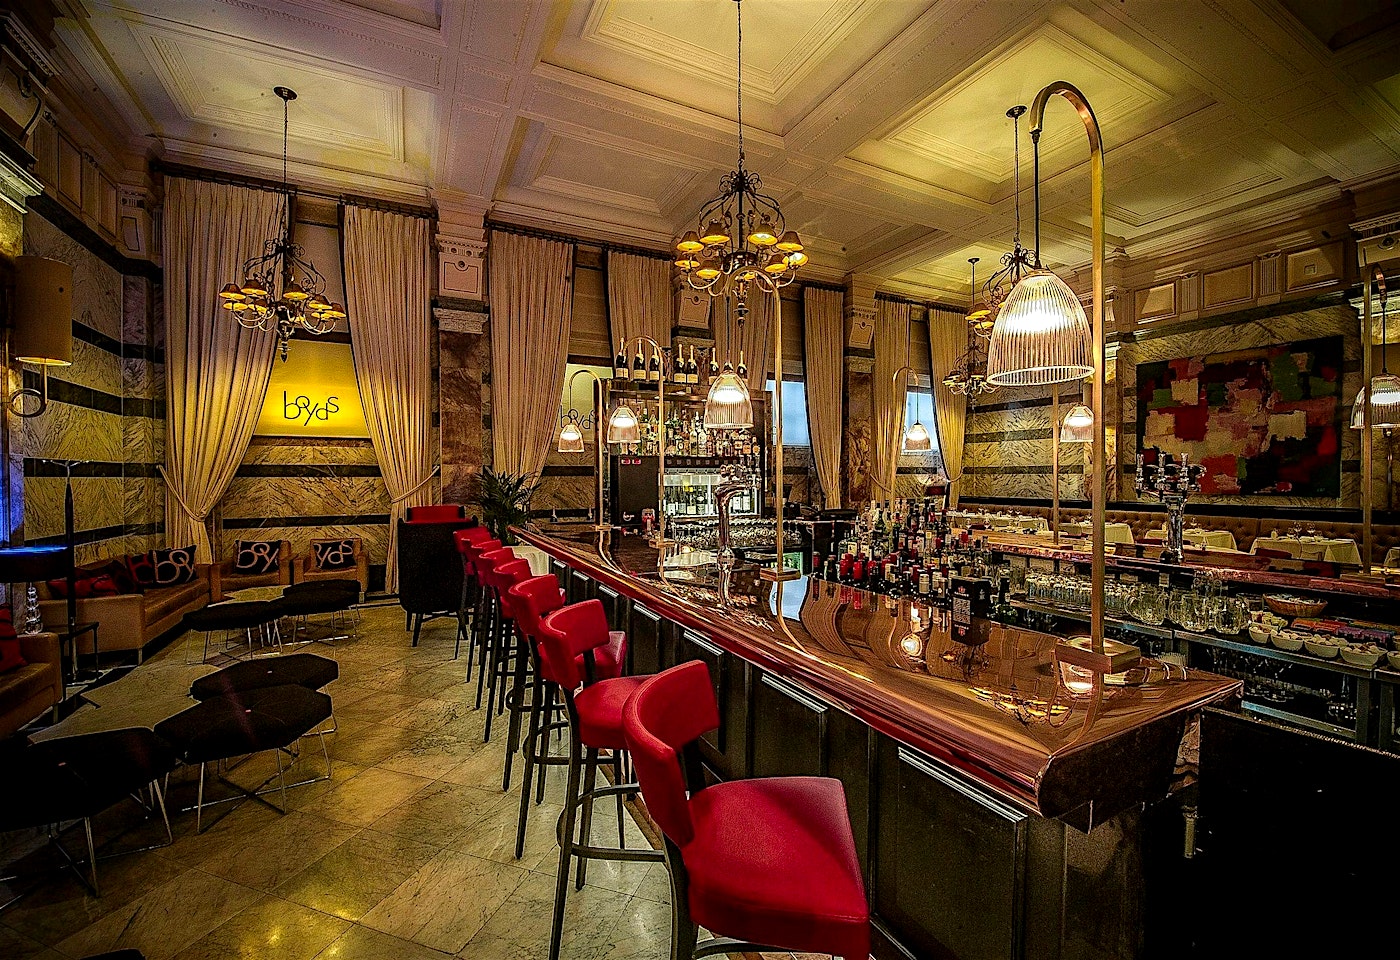 boyds bar and grill embankment wine bar london